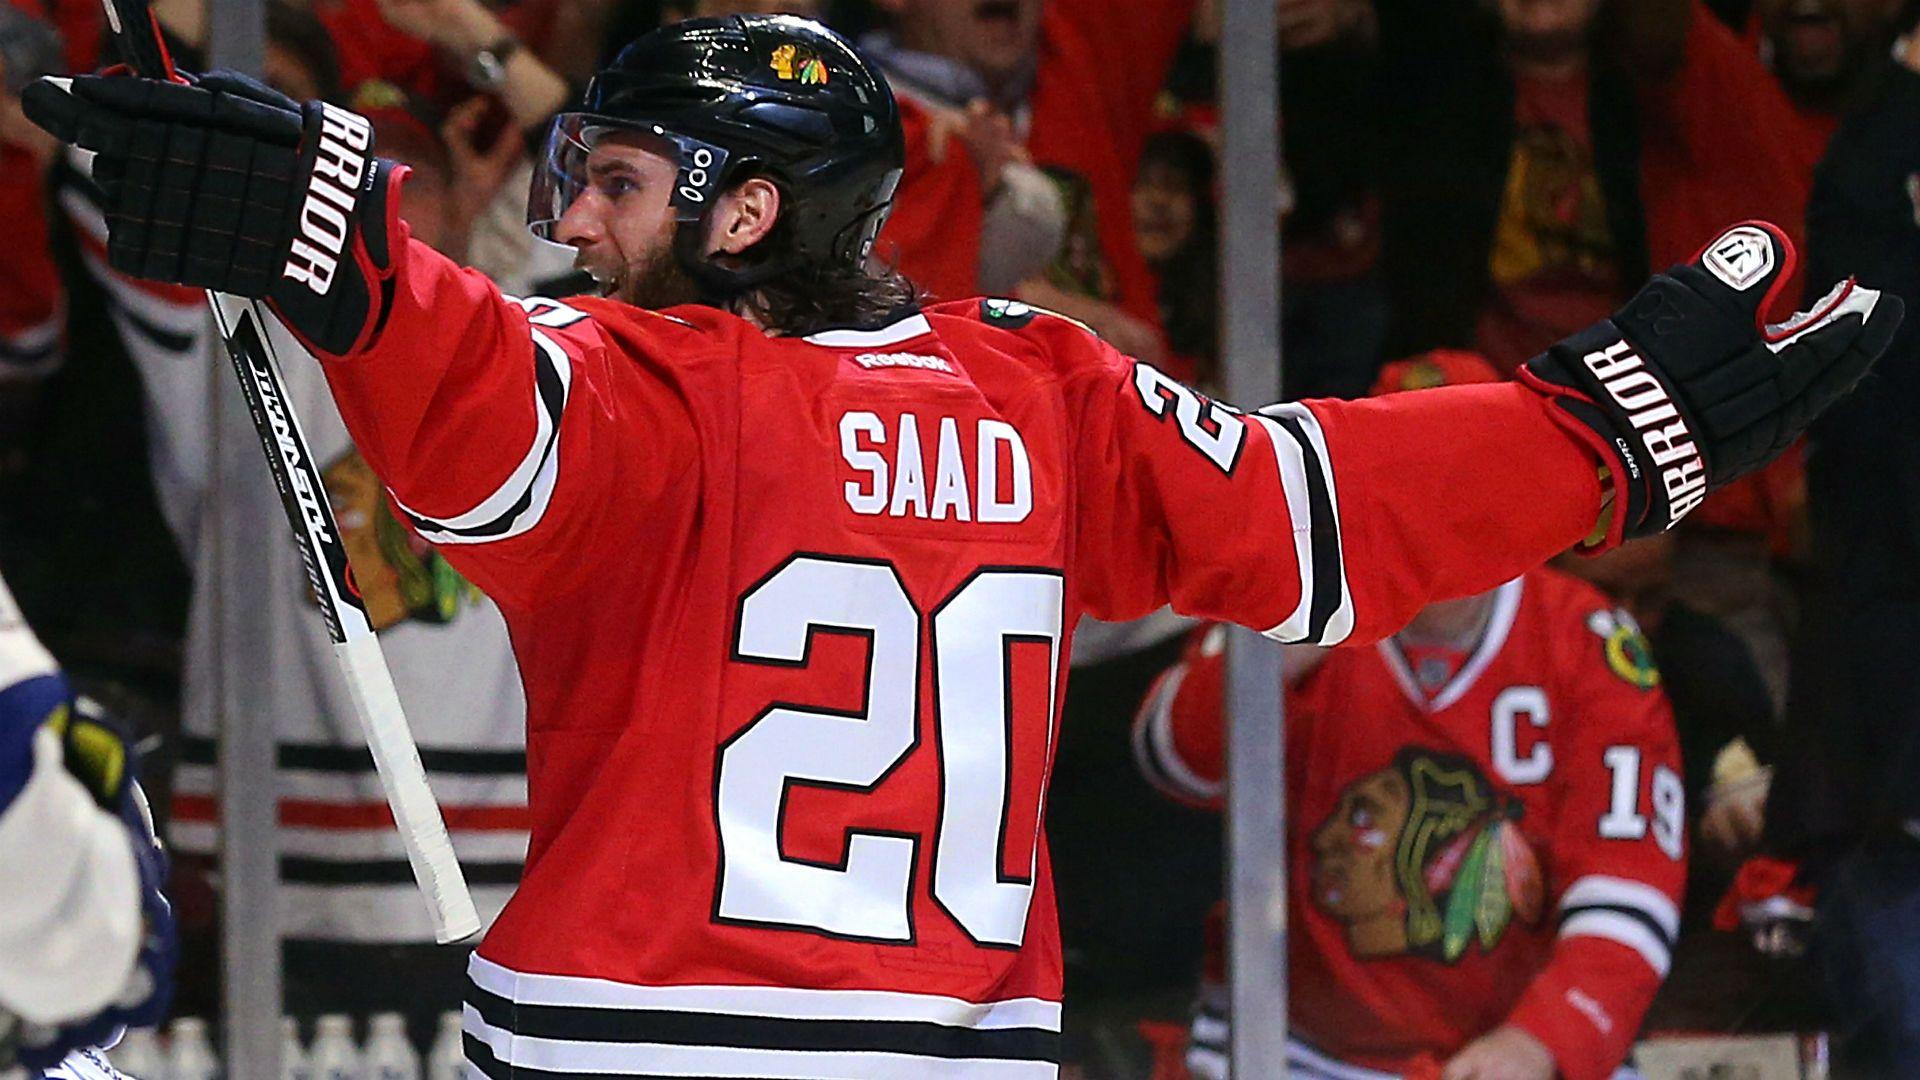 Brandon Saad creates chaos, shows why Pittsburgh obsesses over him